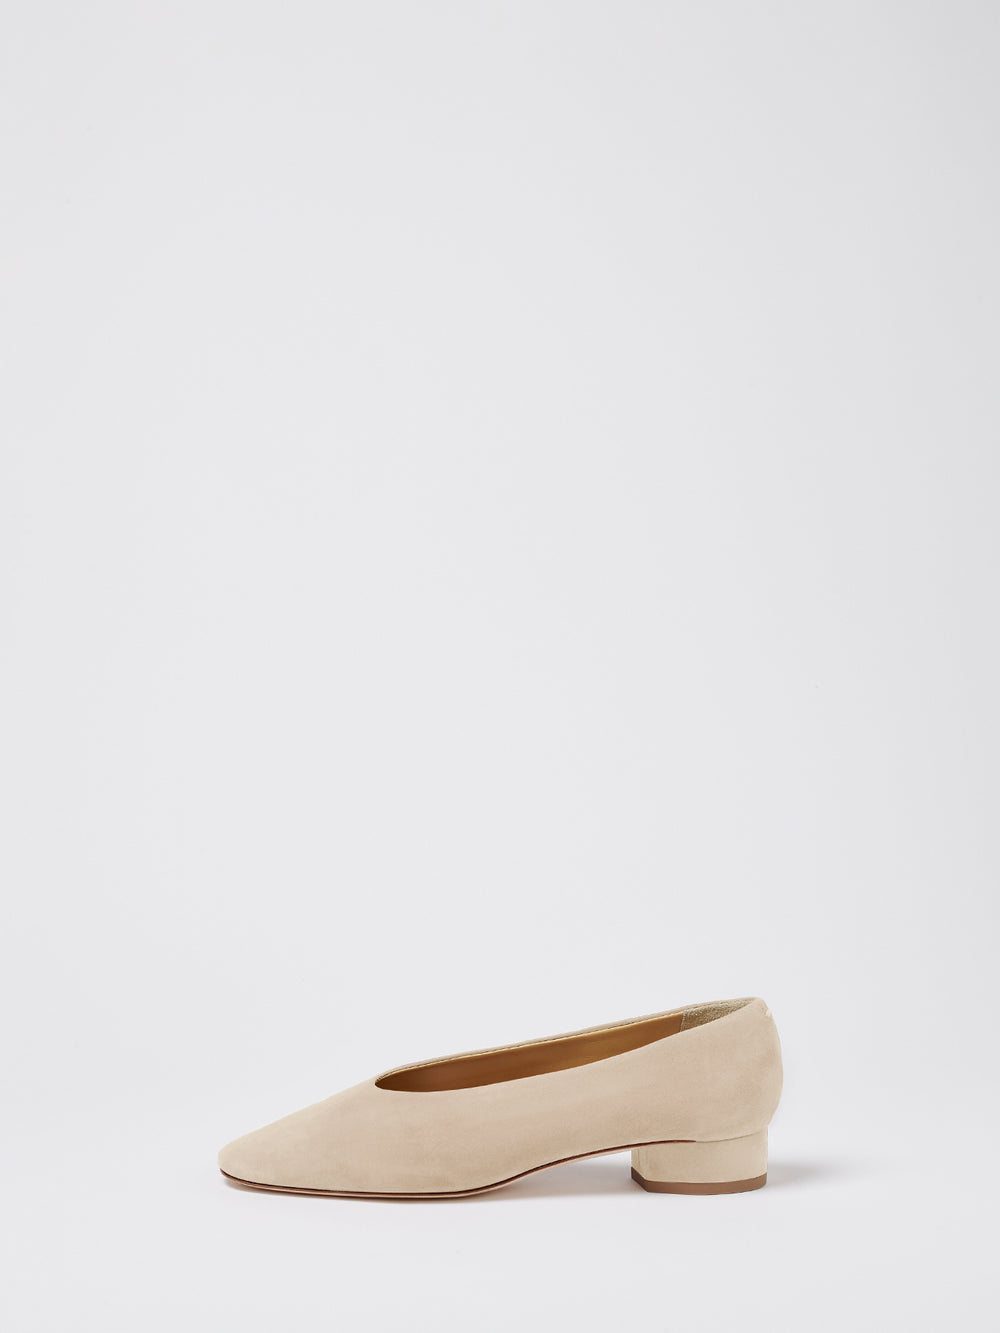 Aeyde | KIRSTEN Creamy Leather Flat